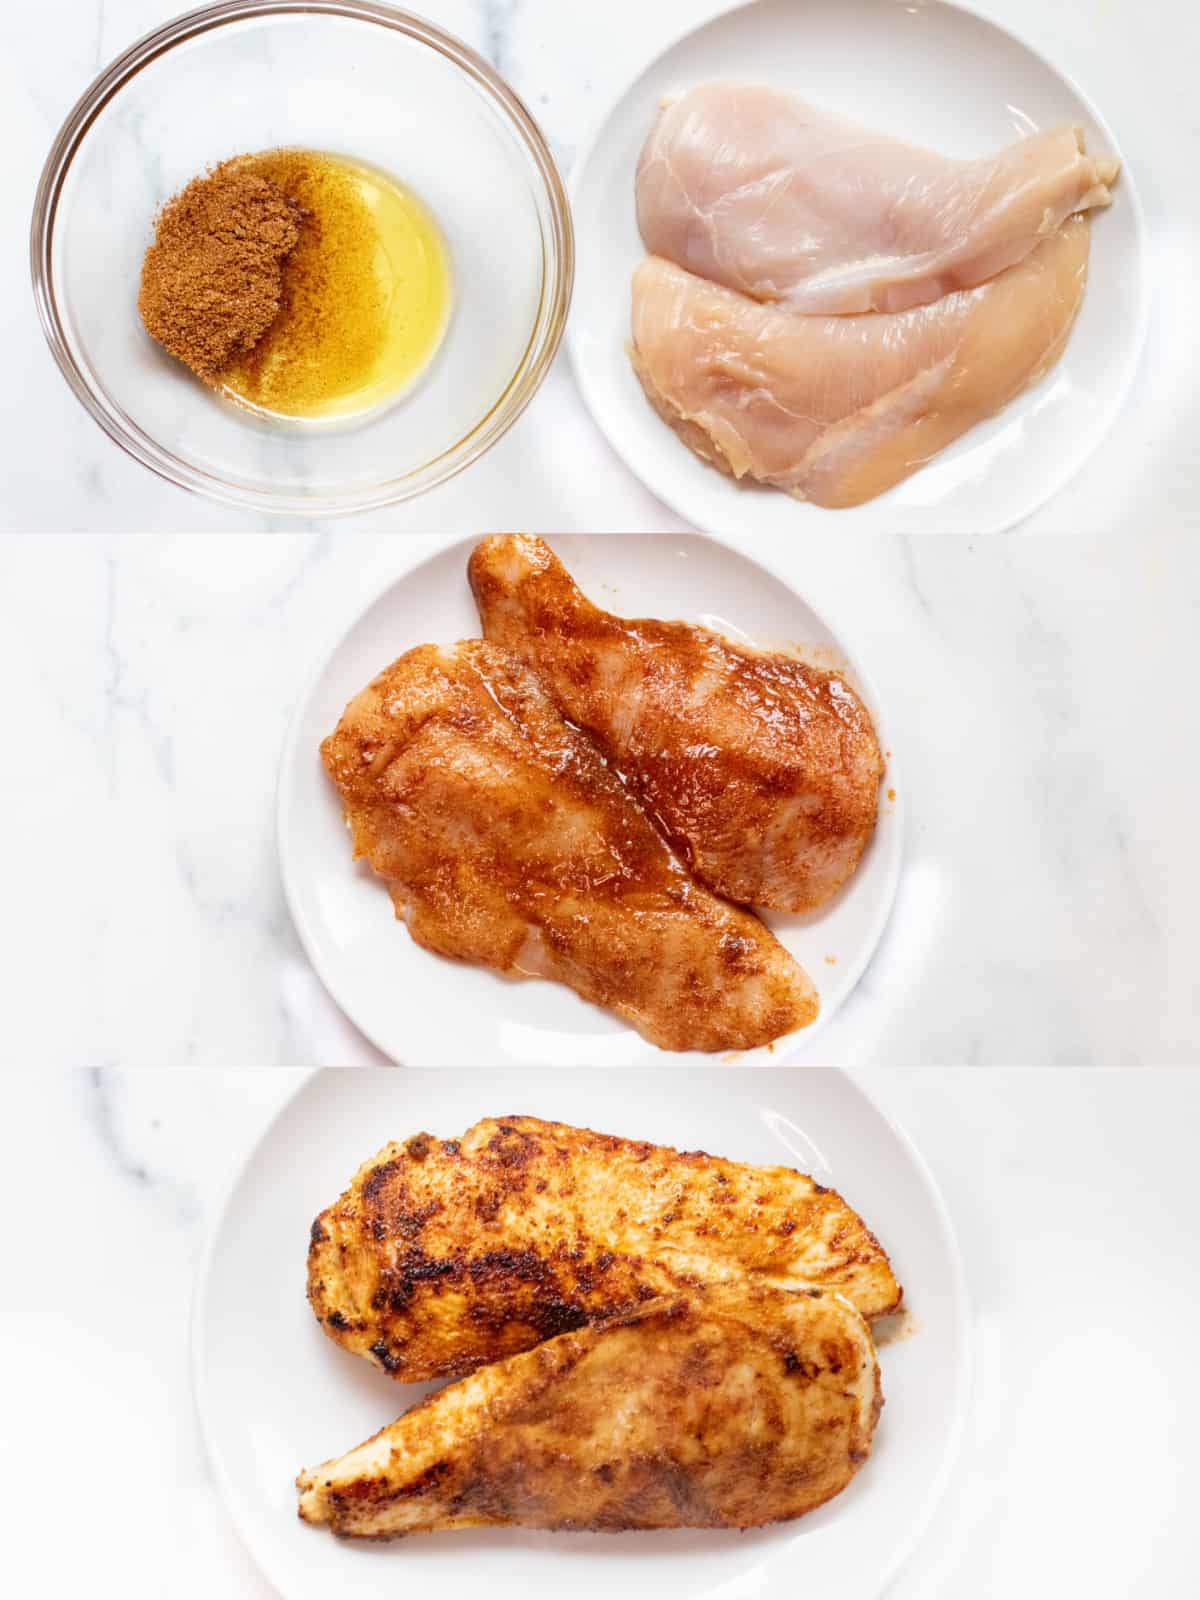 a bowl of seasoning and oil next to a plate of chicken, then the chicken mixed in it, and then a plate of the cooked chicken.